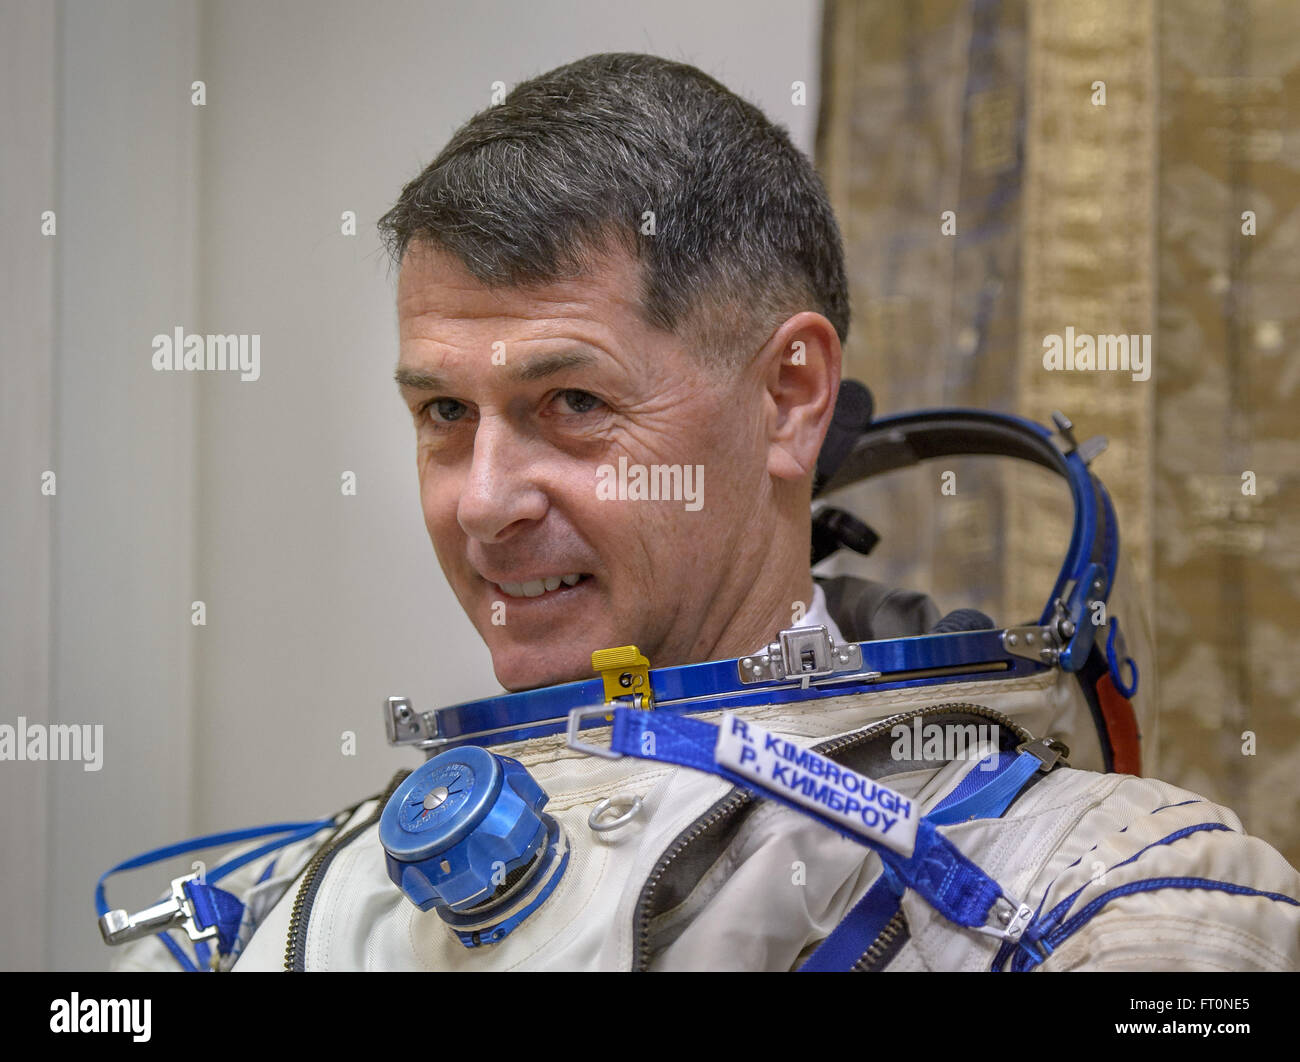 Expedition 47 backup crew member, NASA astronaut Shane Kimbrough dons his Sokol suit ahead of his Soyuz qualification exams with Russian cosmonauts Andre Borisenko, and Sergei Ryzhikov of Roscosmos, Wednesday, Feb. 24, 2016, at the Gagarin Cosmonaut Training Center (GCTC) in Star City, Russia. Photo Credit: (NASA/Bill Ingalls) Stock Photo